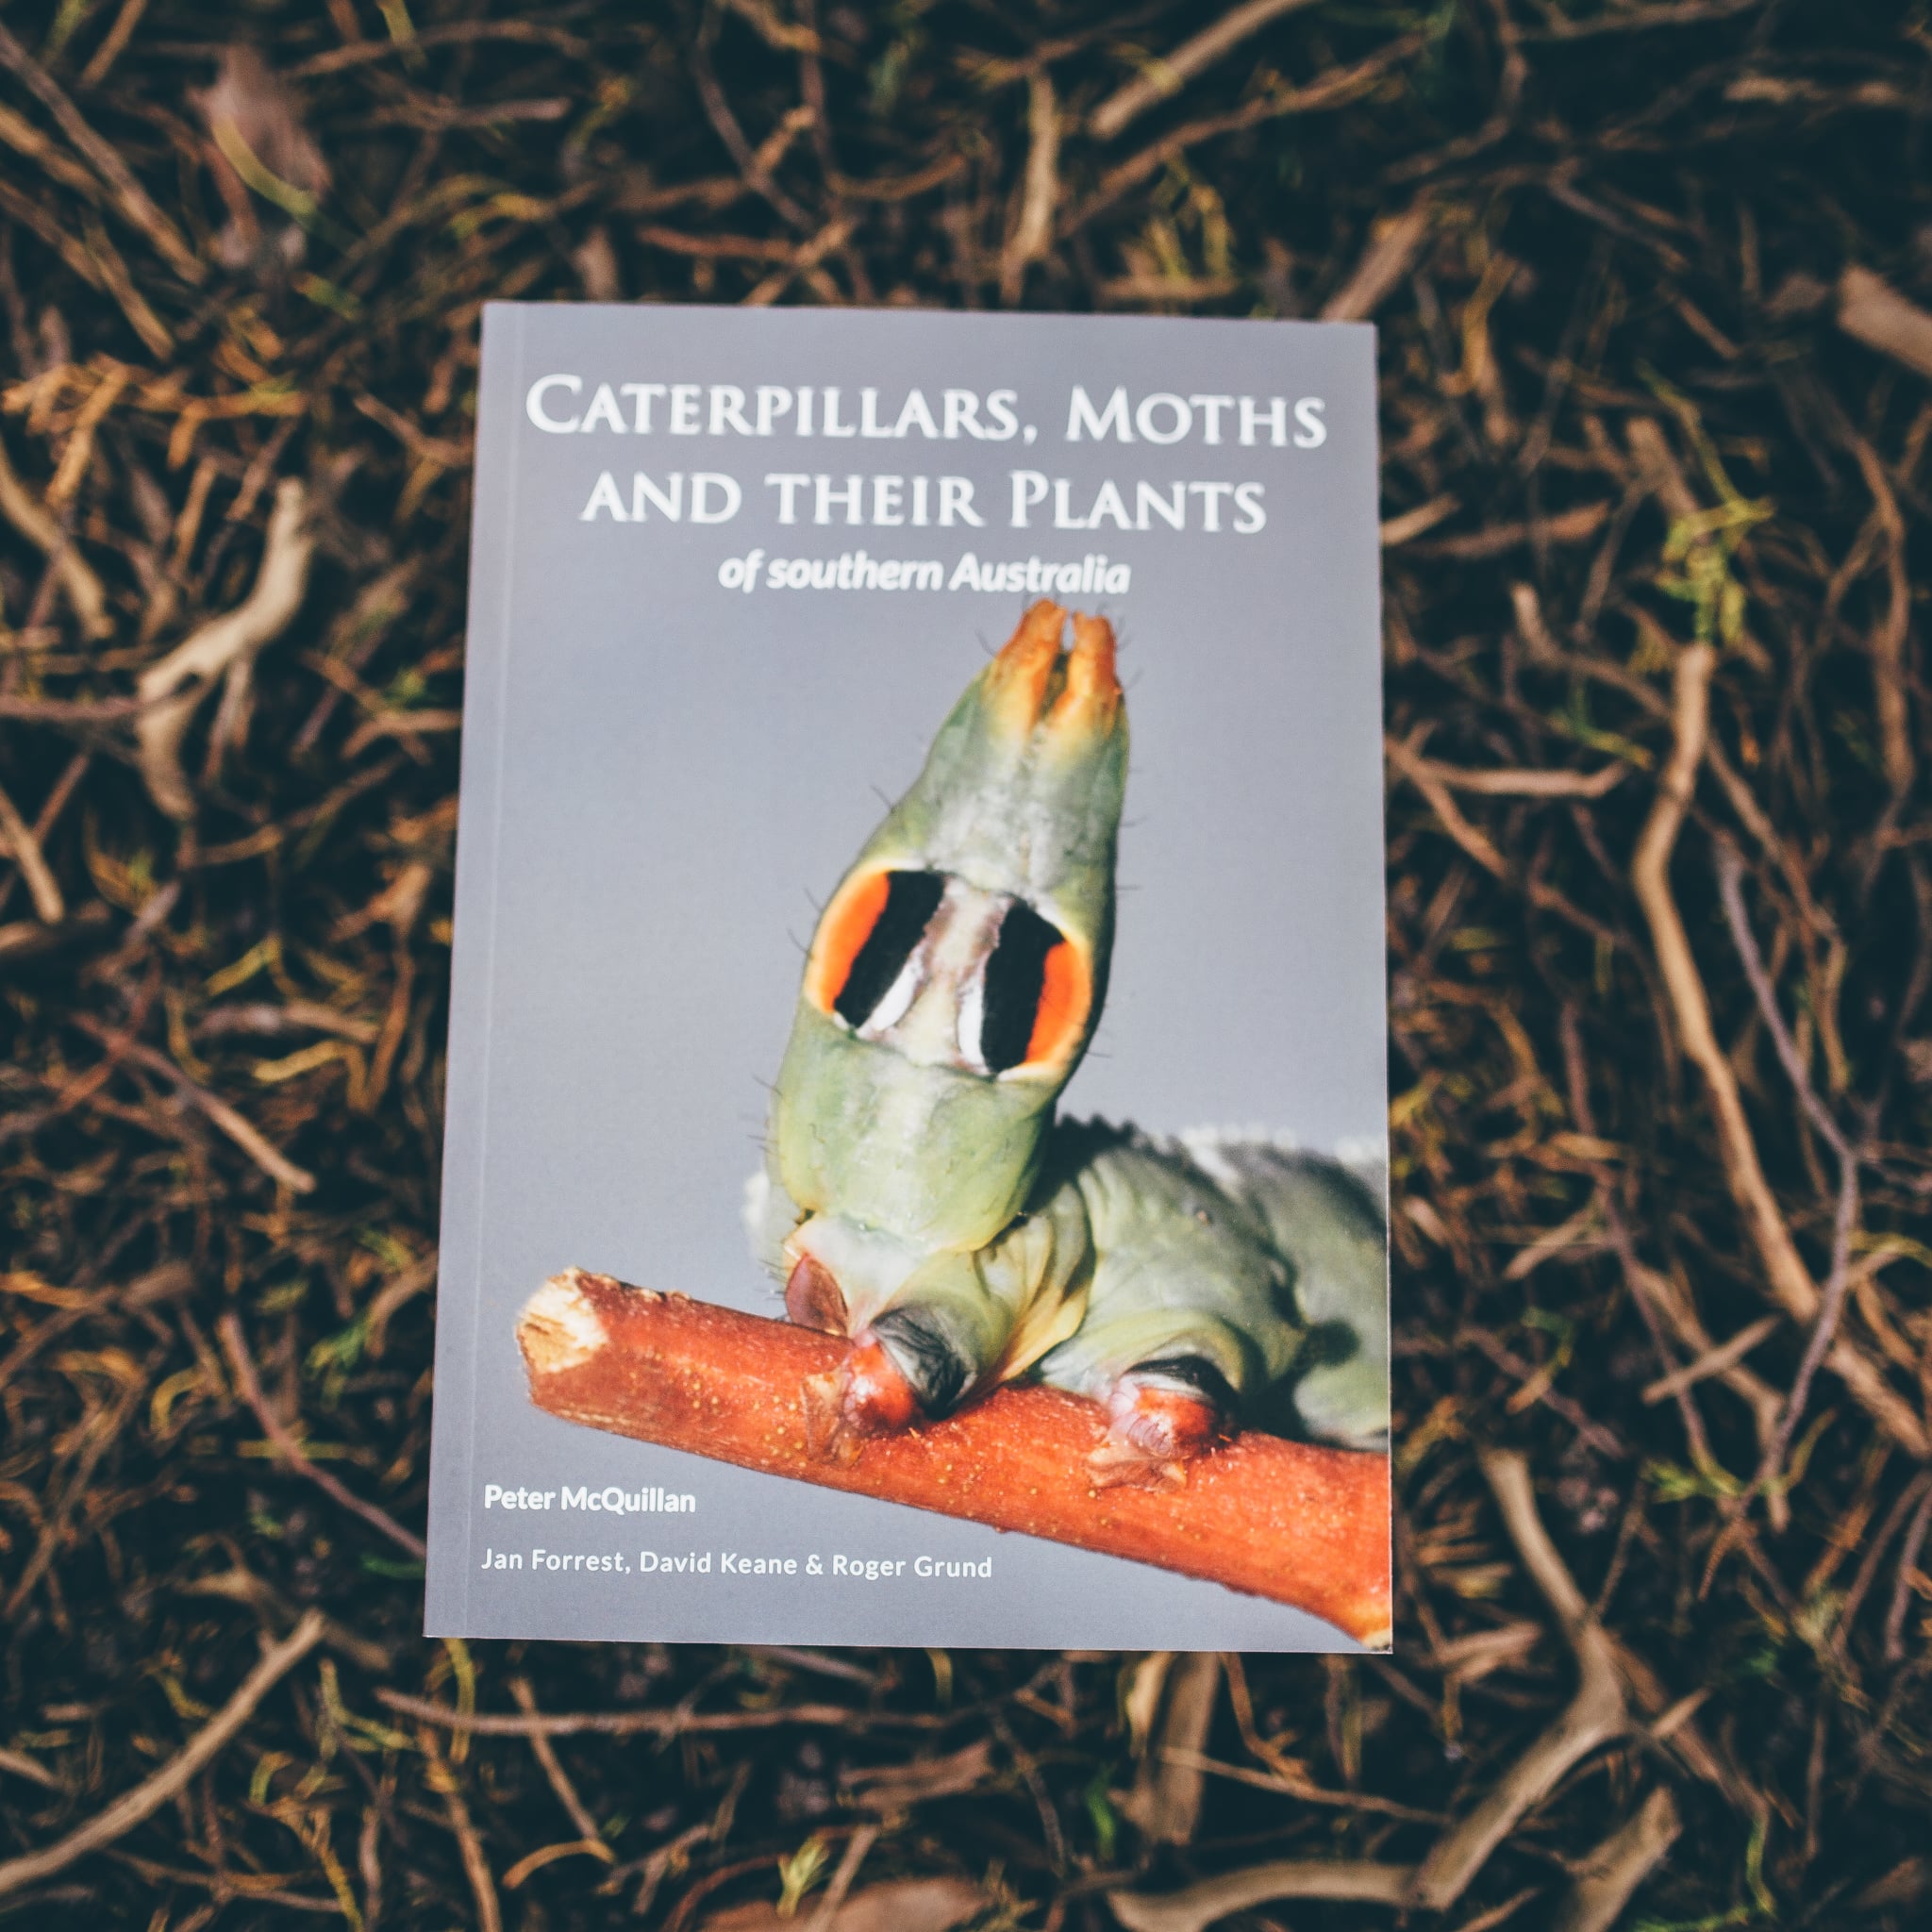 Caterpillars, moths and their plants